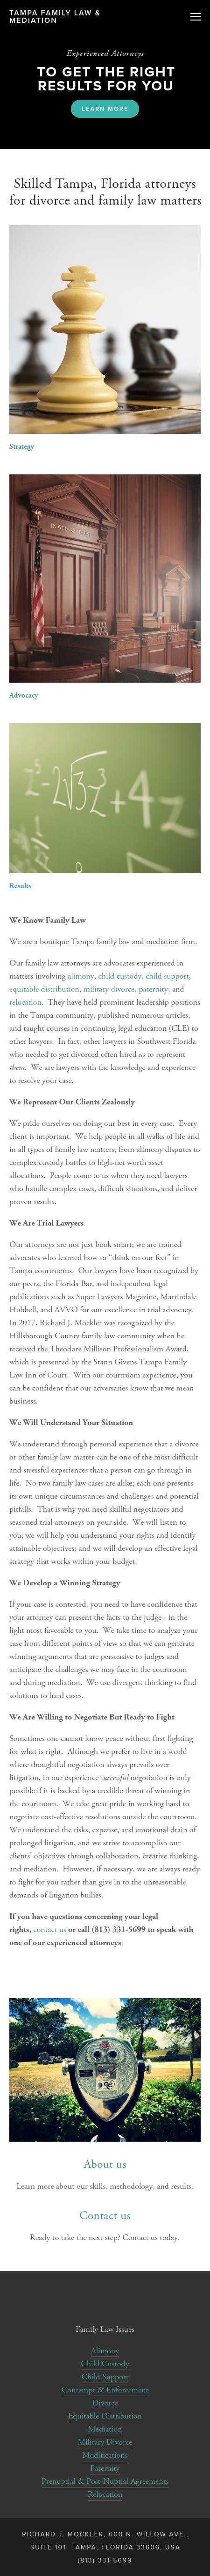 Solomon Law Group, P.A. - Tampa FL Lawyers